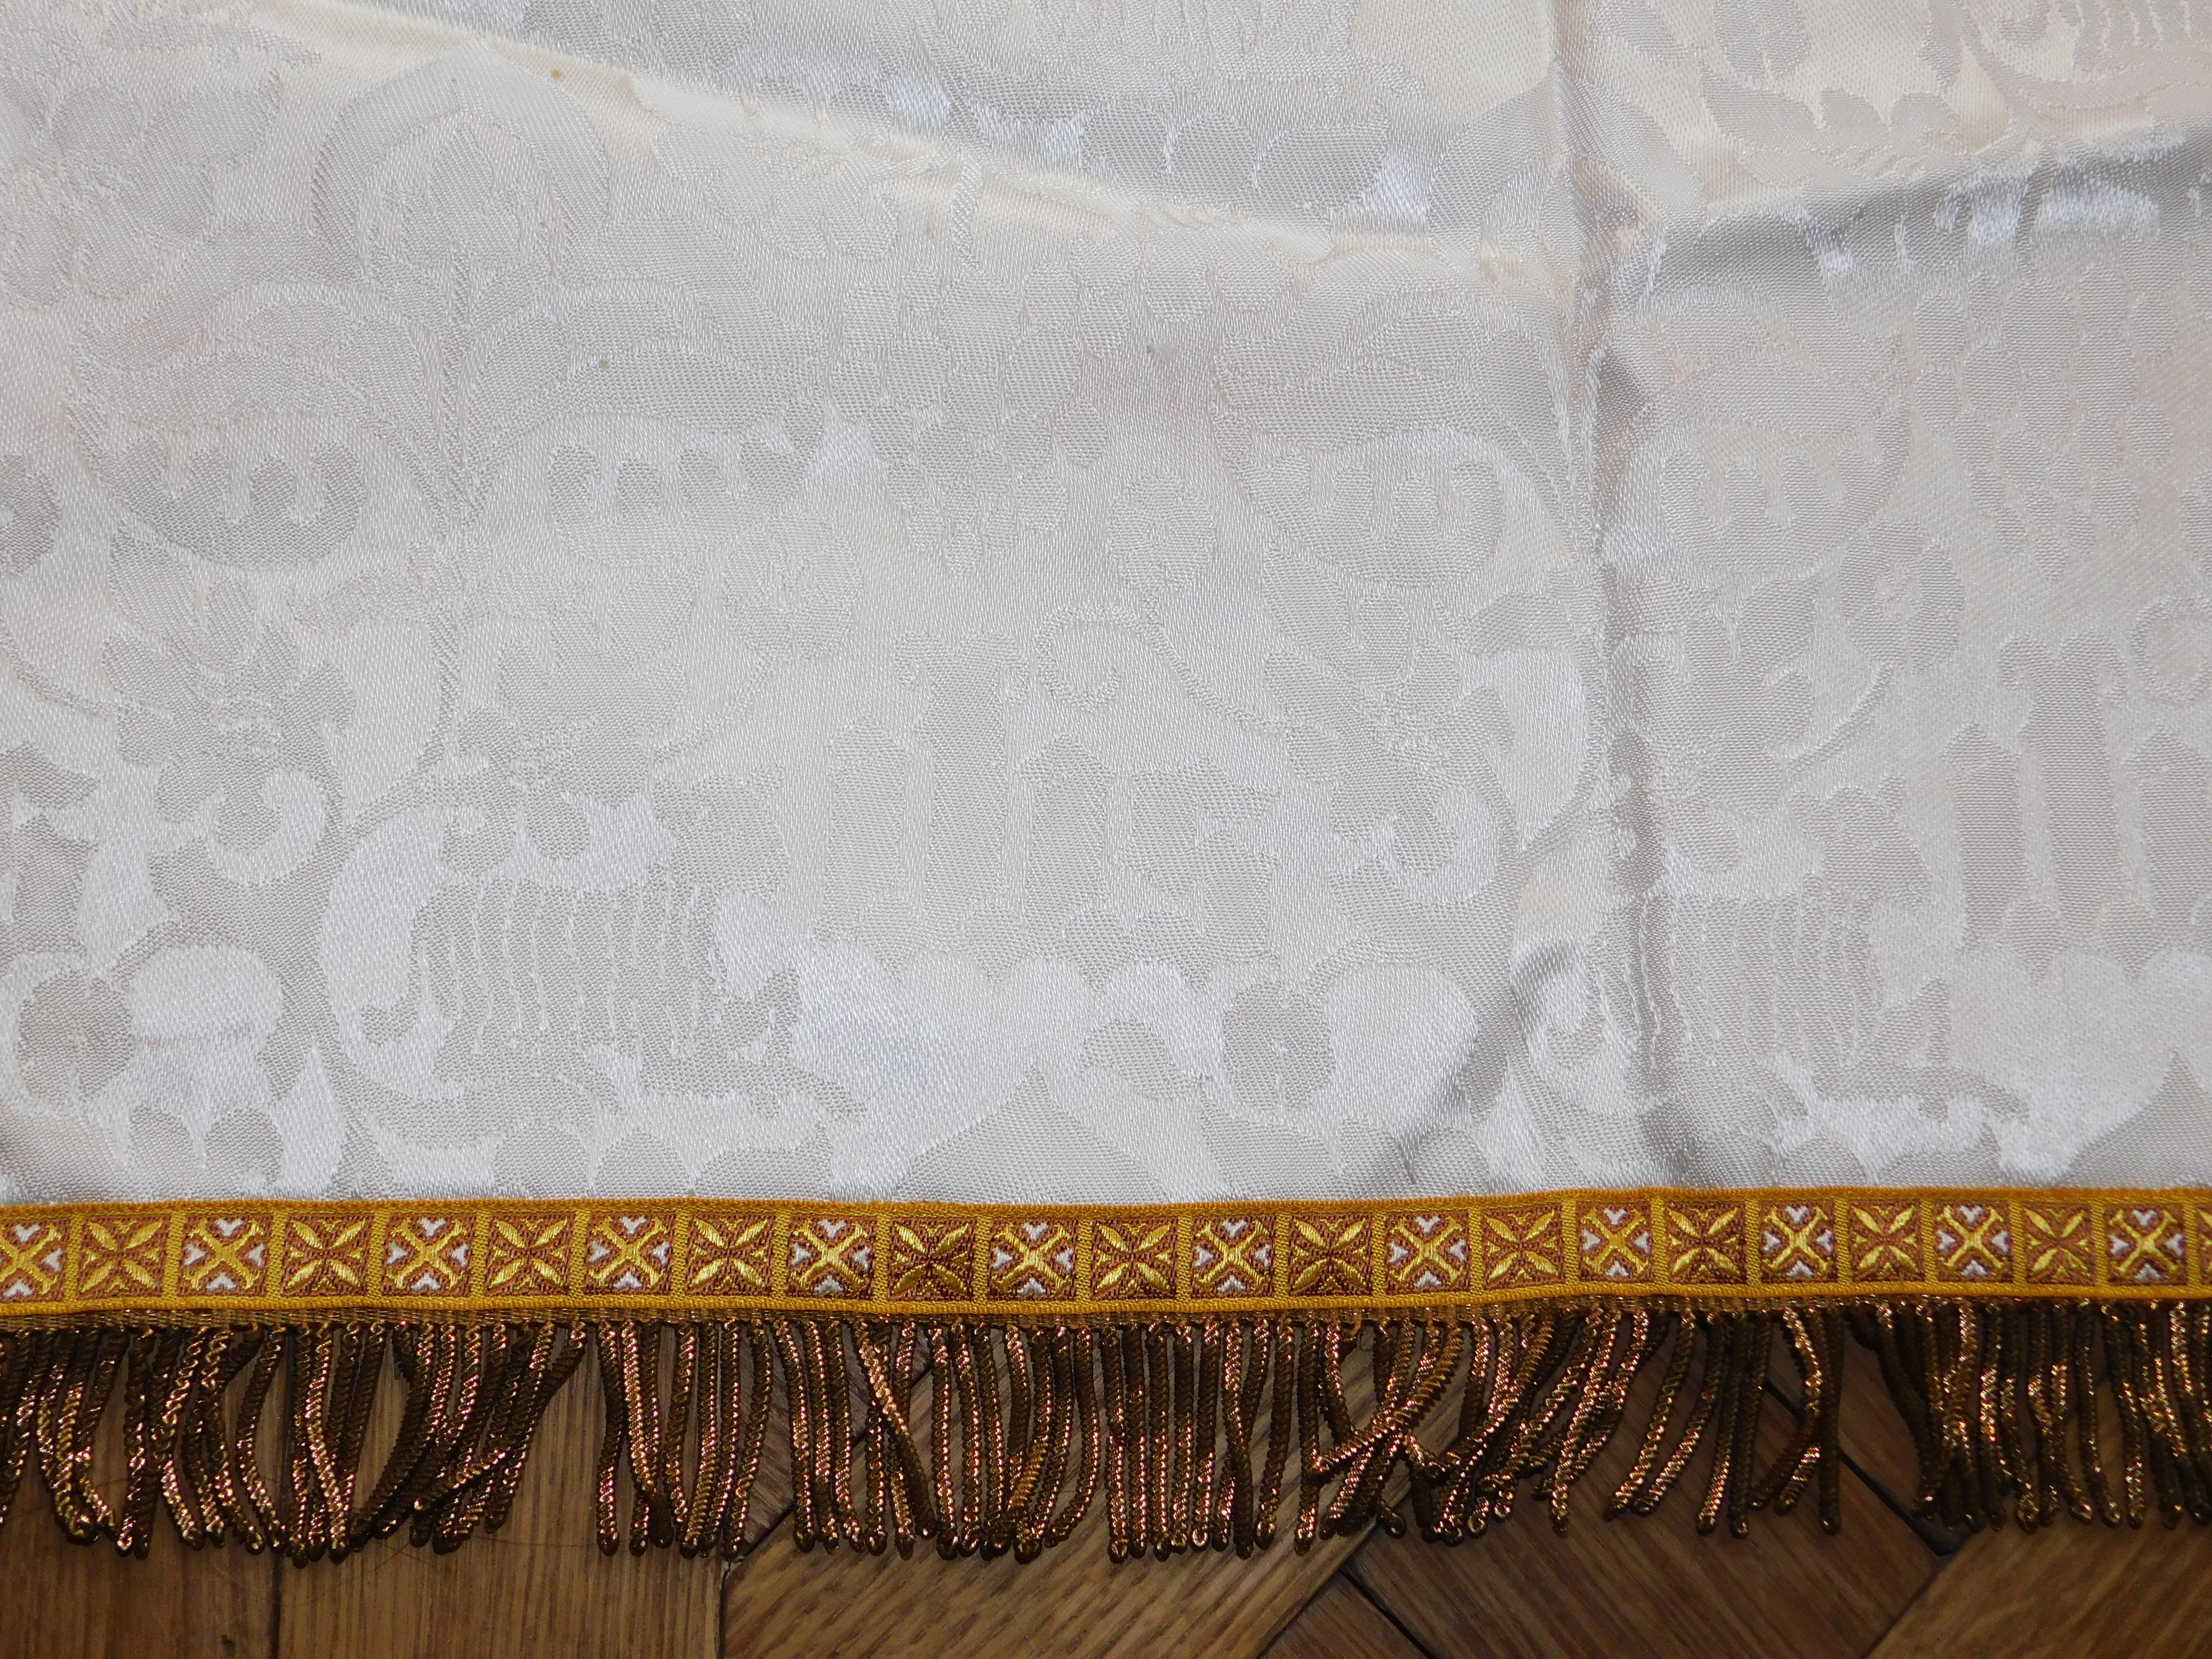 Five Vintage Damask and Embroidered Chalice Veil Catholic Alter Textiles For Sale 6